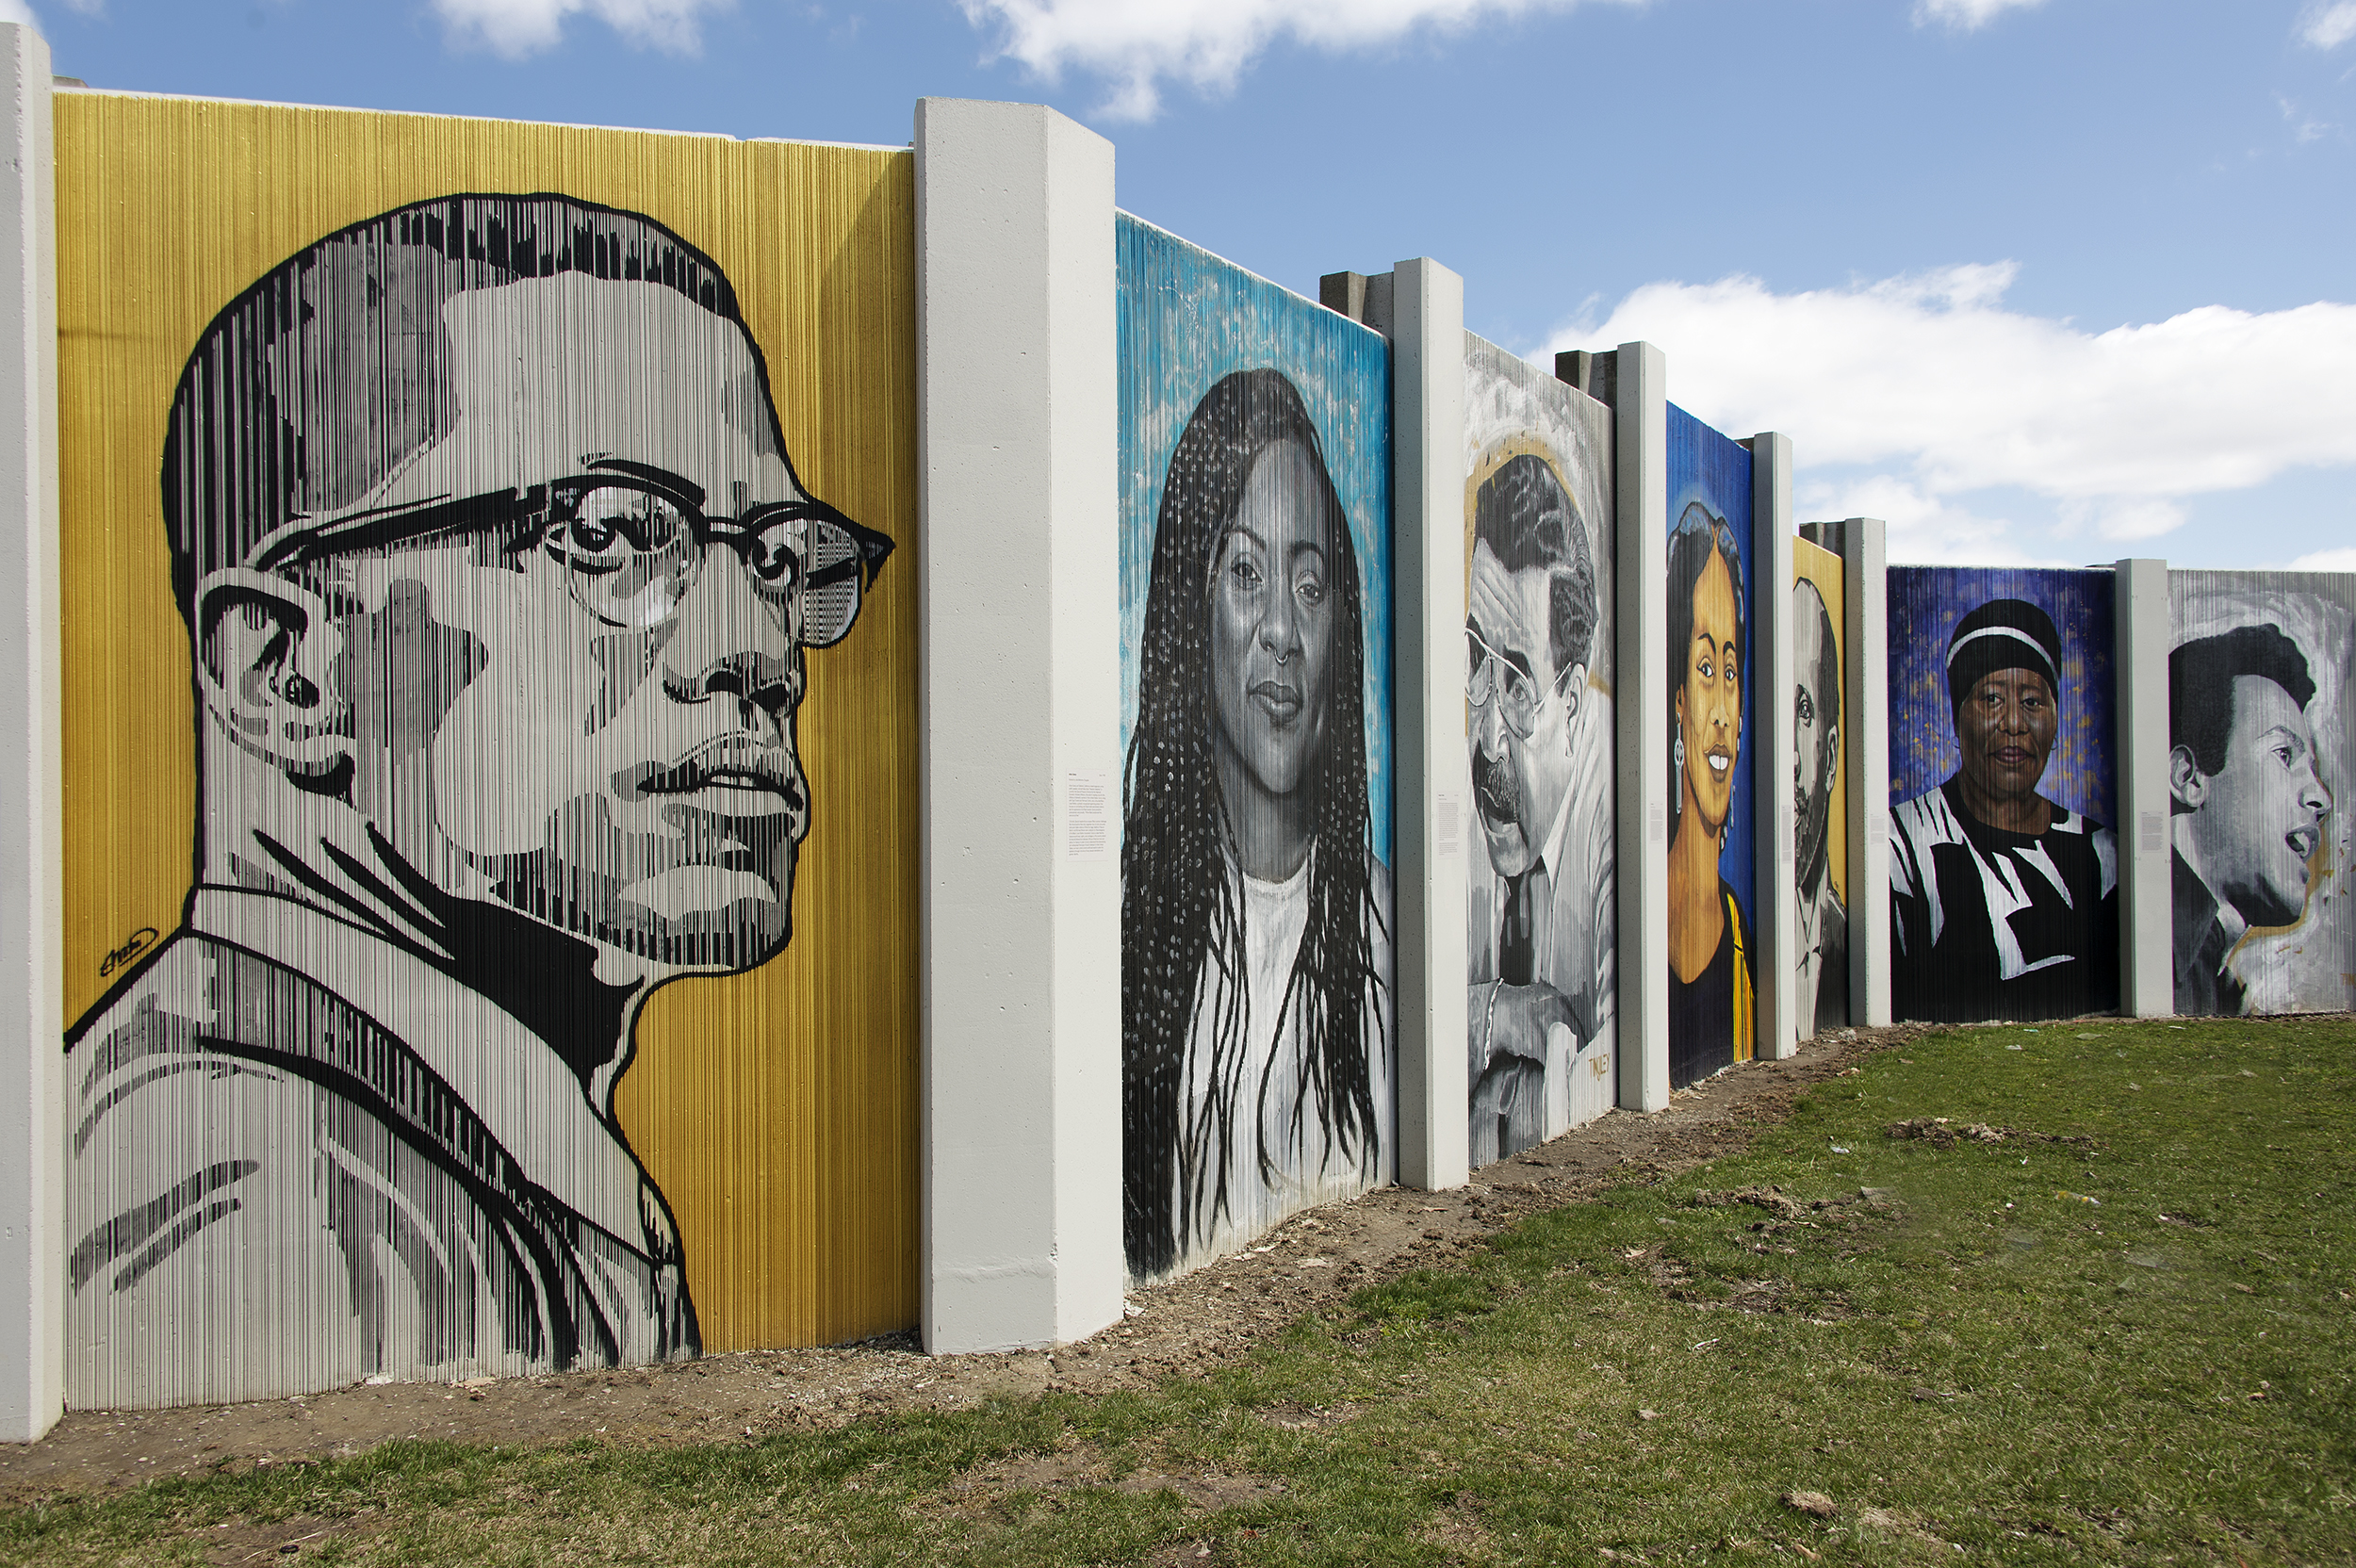 A view of The Freedom Wall featuring, from left to right, Malcolm X, Alicia Garza, George K. Arthur, W. E. B. DuBois, Eva Doyle, and Huey P. Newton